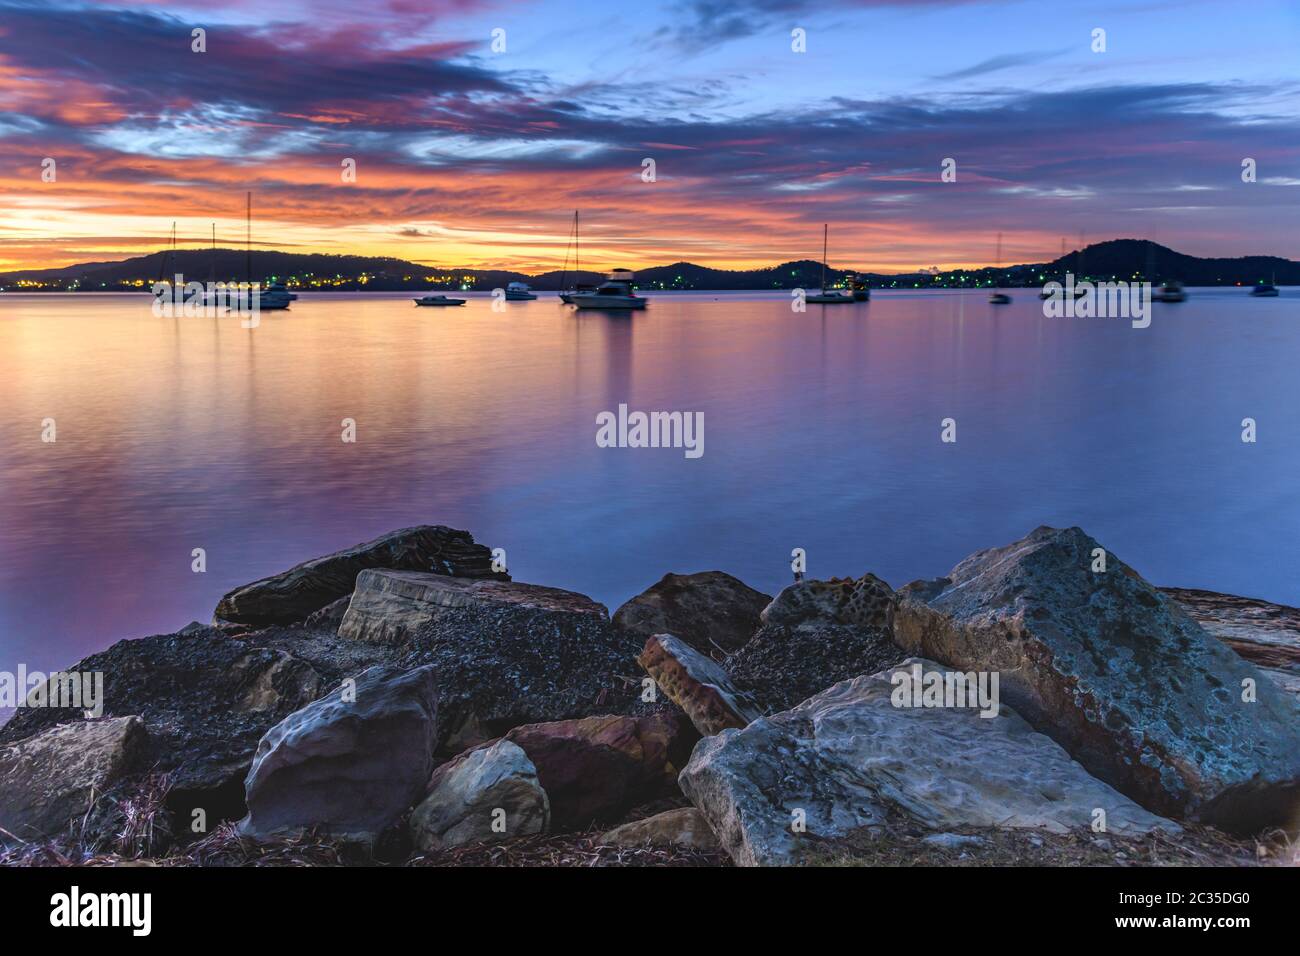 Colourful Clouds and Sunrise from Koolewong Waterfront on the Central Coast, NSW, Australia. Stock Photo